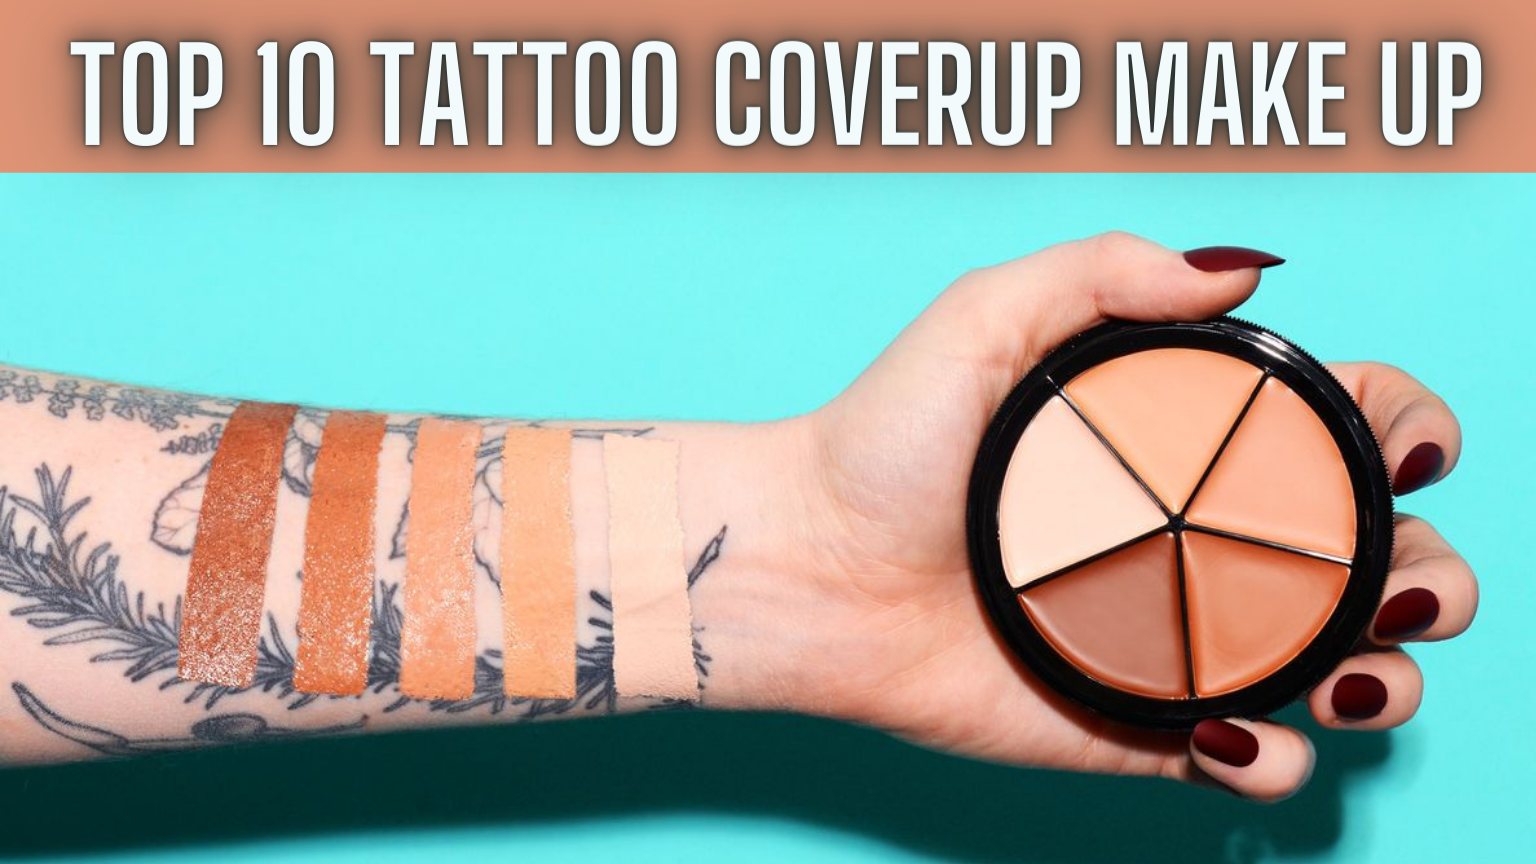 Tattoo cover up makeup